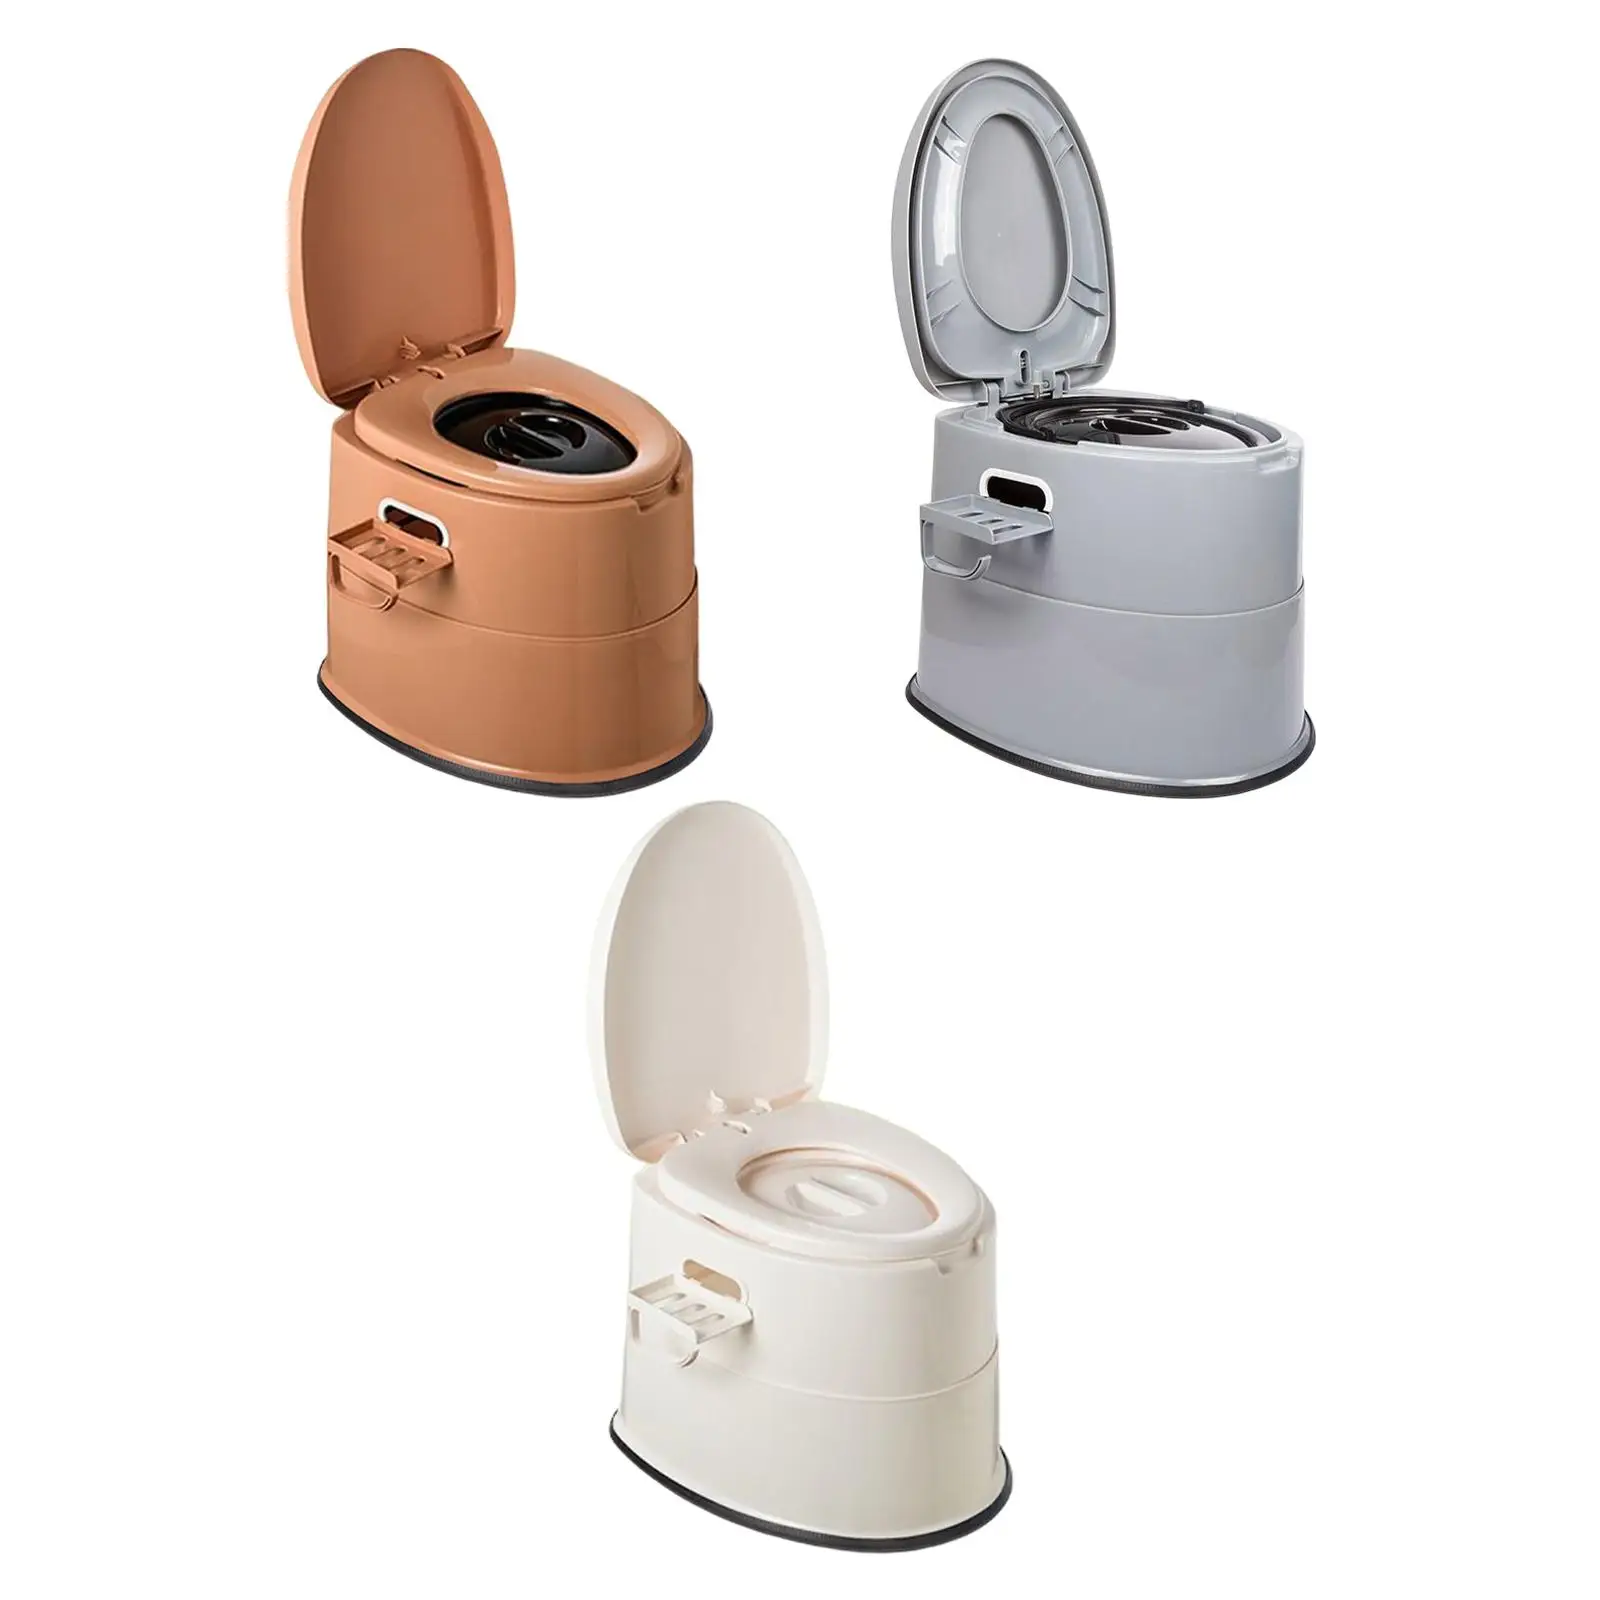 Travel Toilet Removable Toilet Paper Holder Camping Toilet for RV Trips